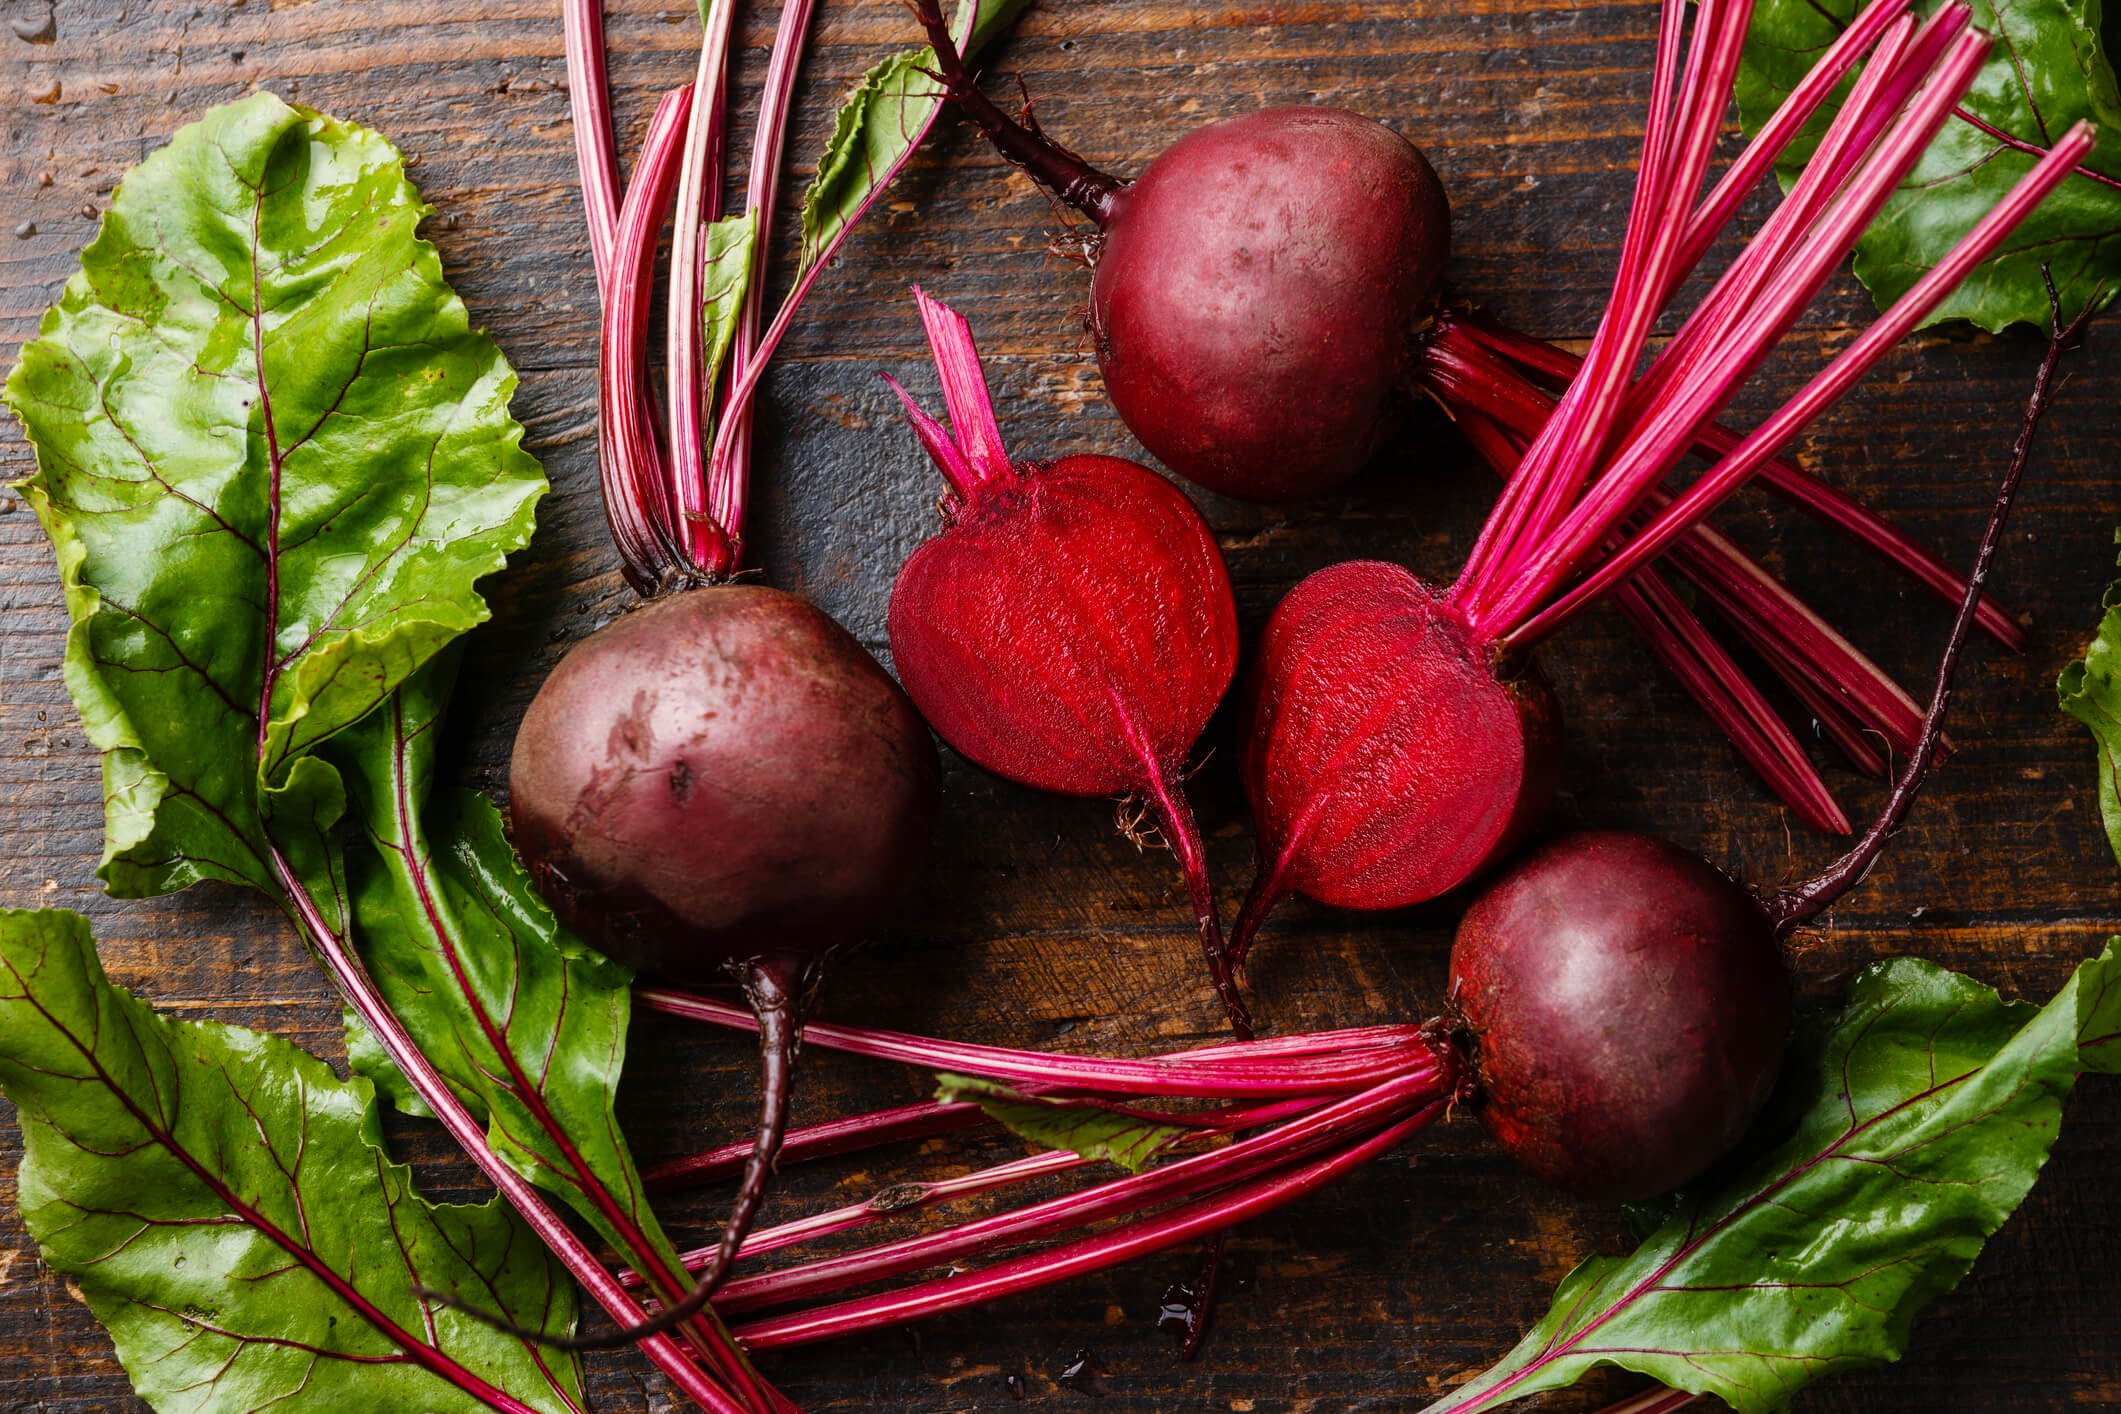 Which beets are healthier: raw or boiled?